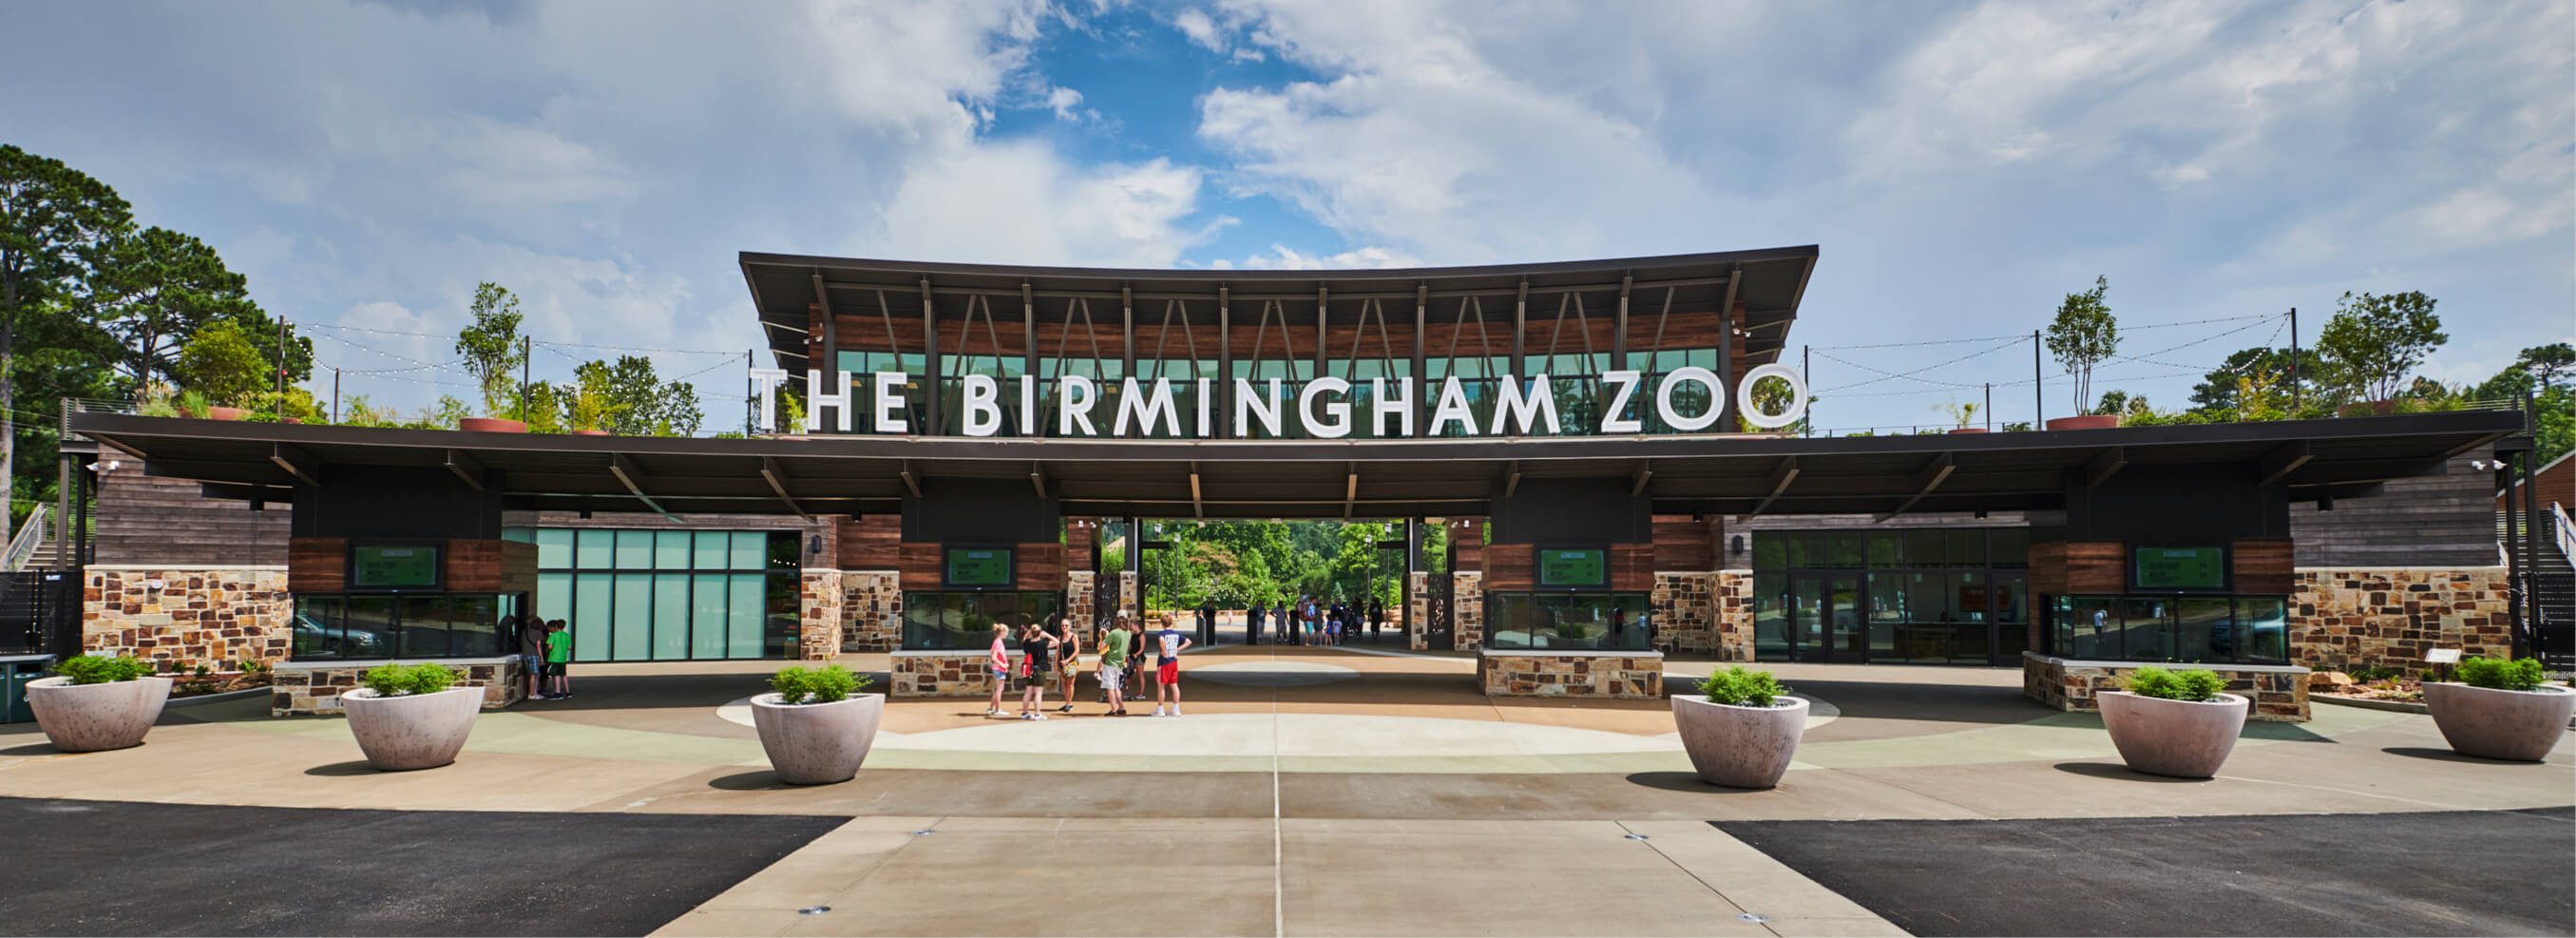 birmingham-zoo-celebrates-grand-opening-of-new-arrival-experience-gmc